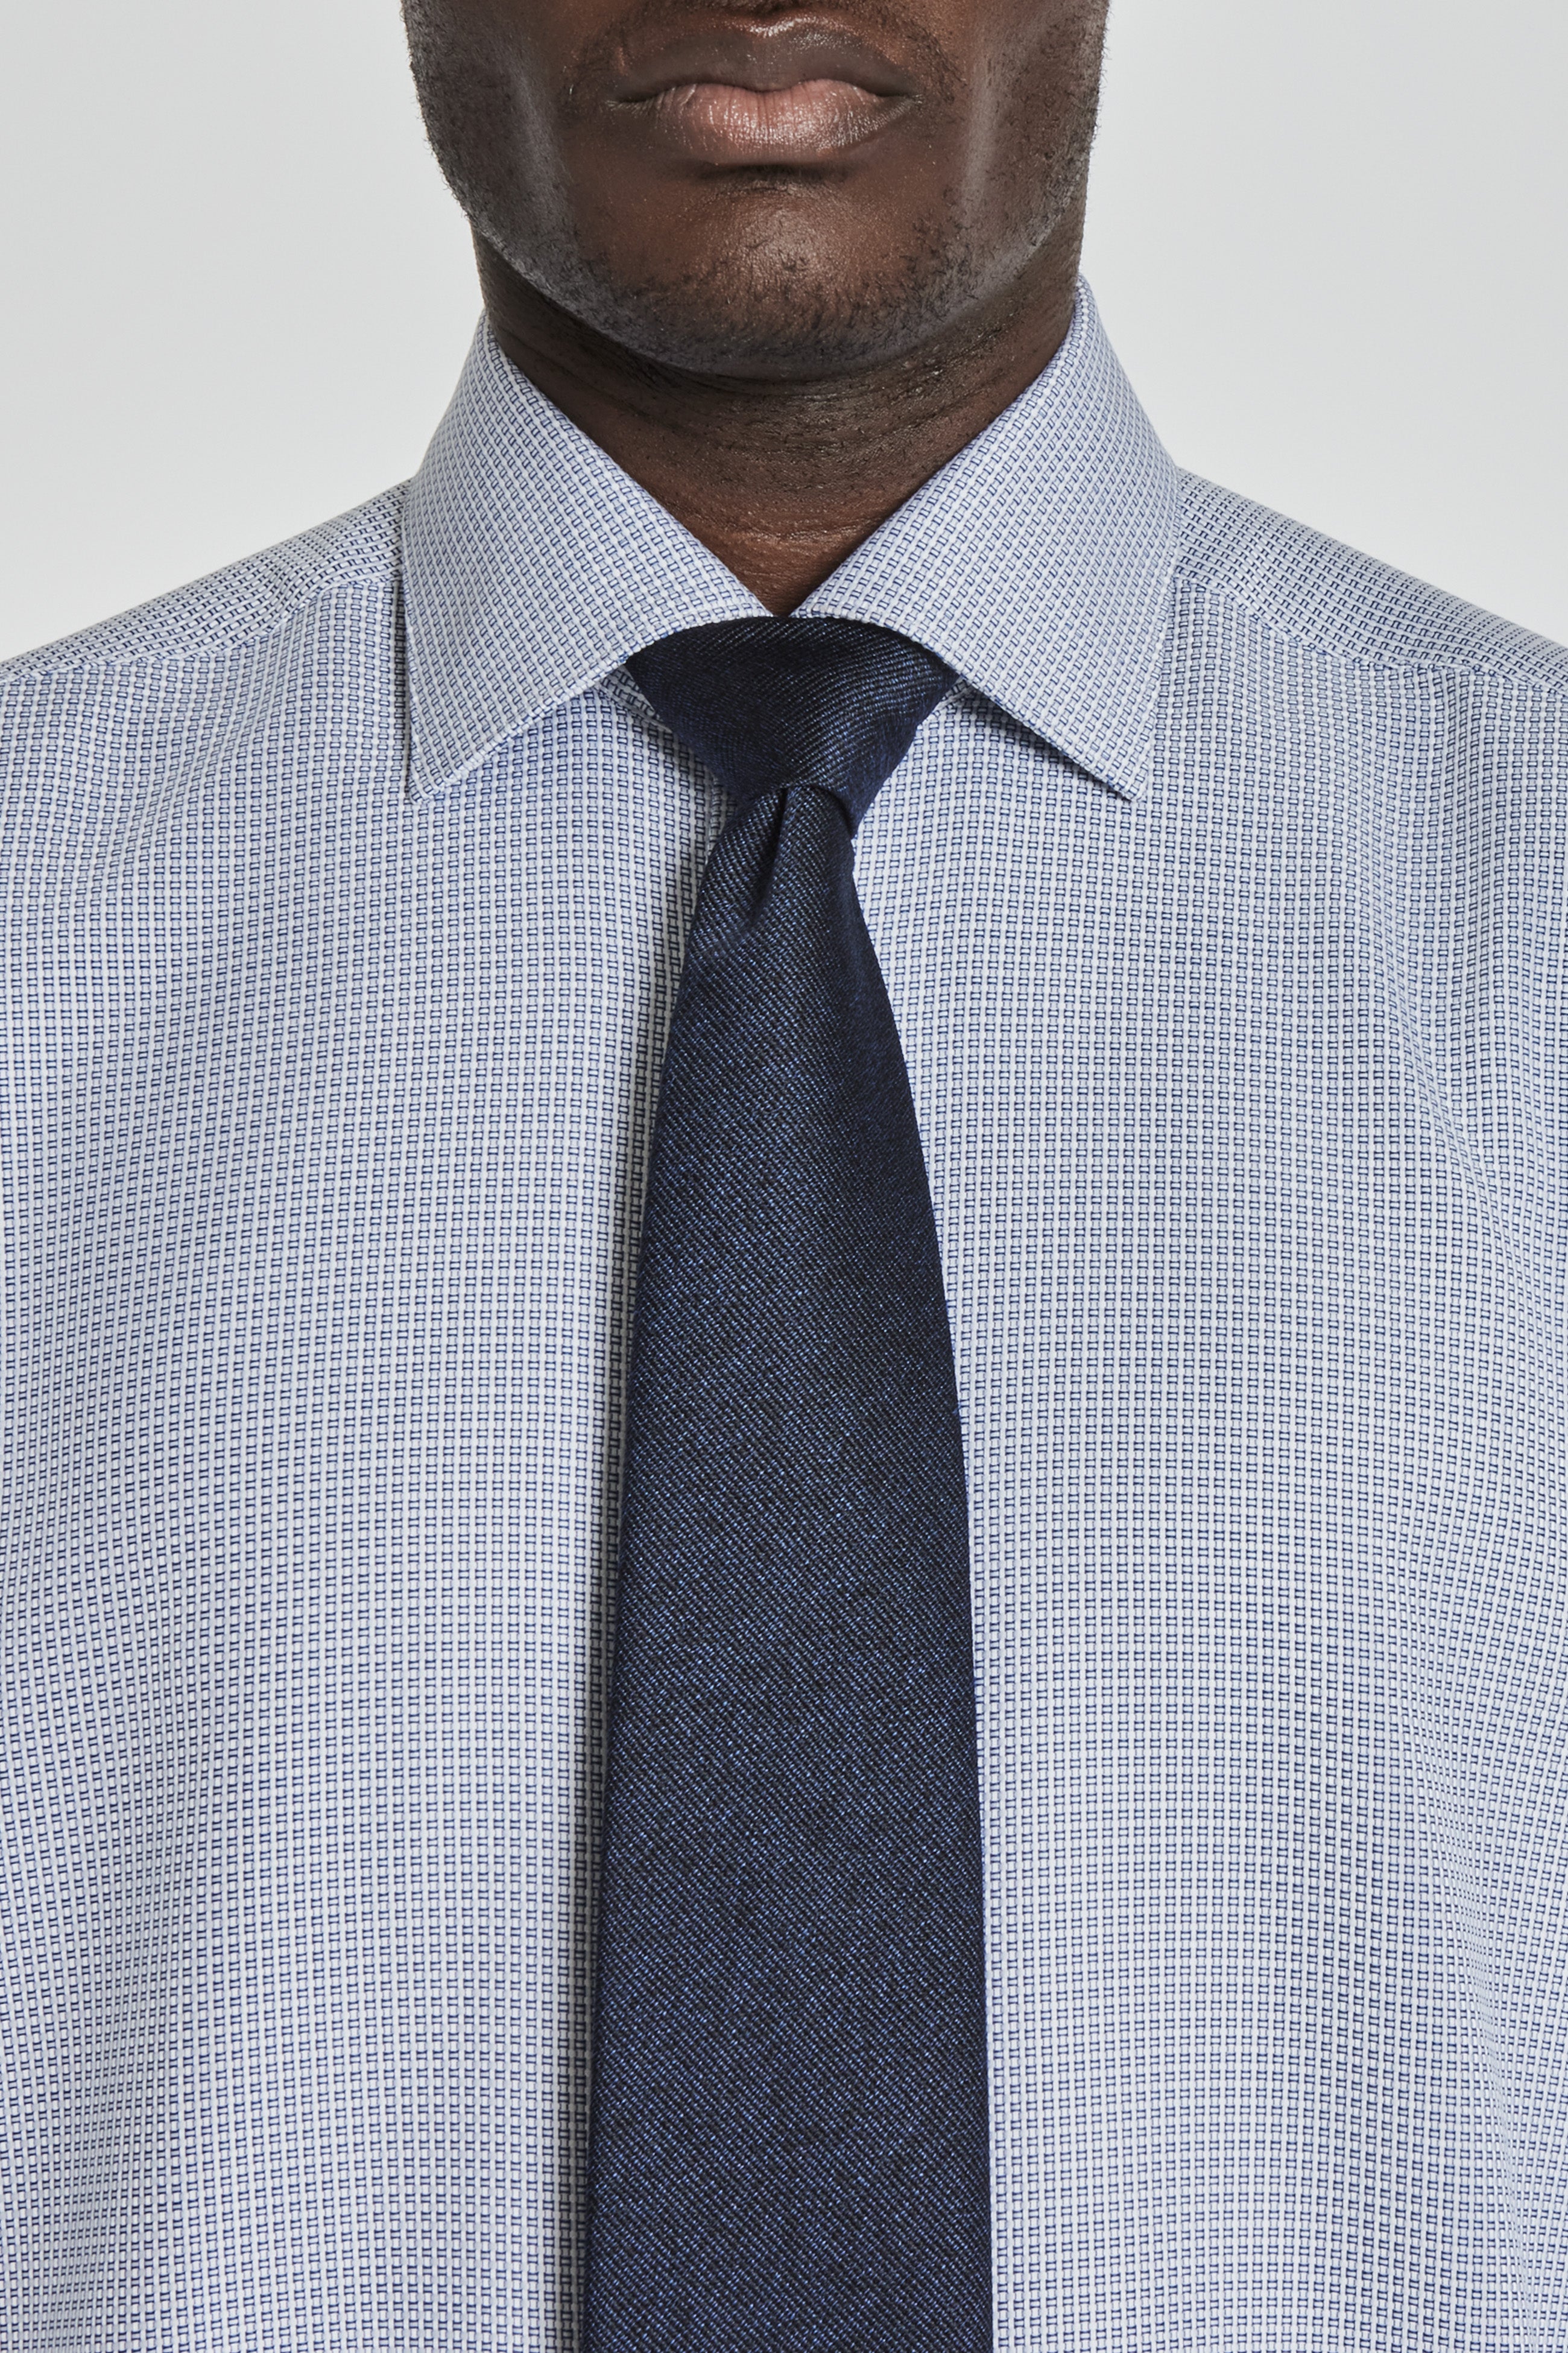 Alt view 2 Bowman Solid Woven Tie in Navy